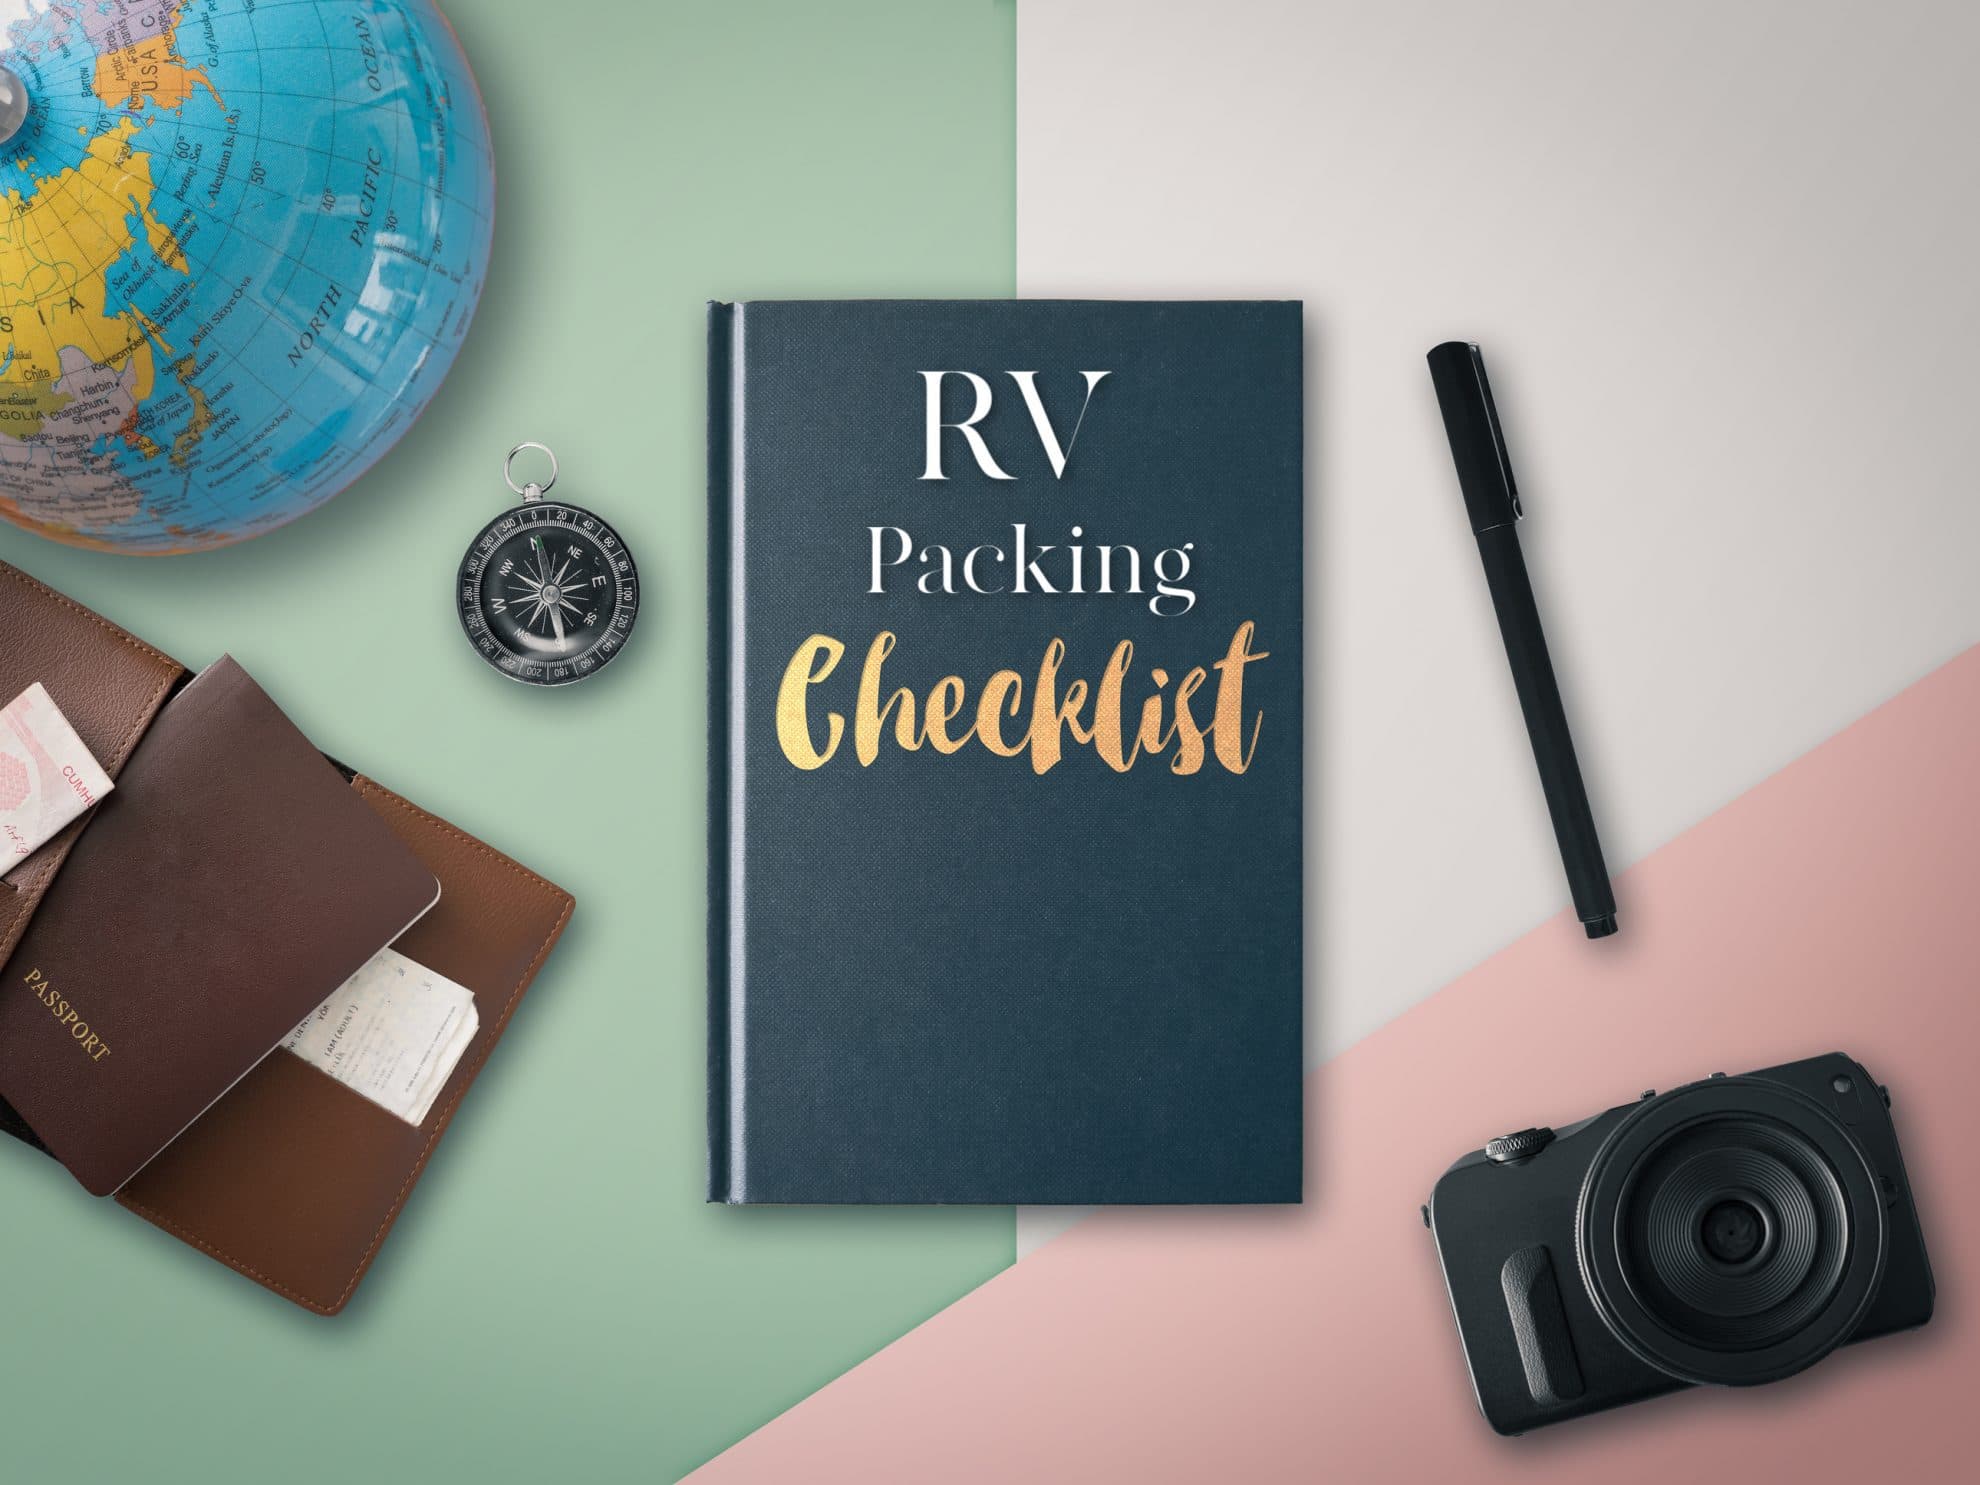 book with RV packing checklist written on the cover